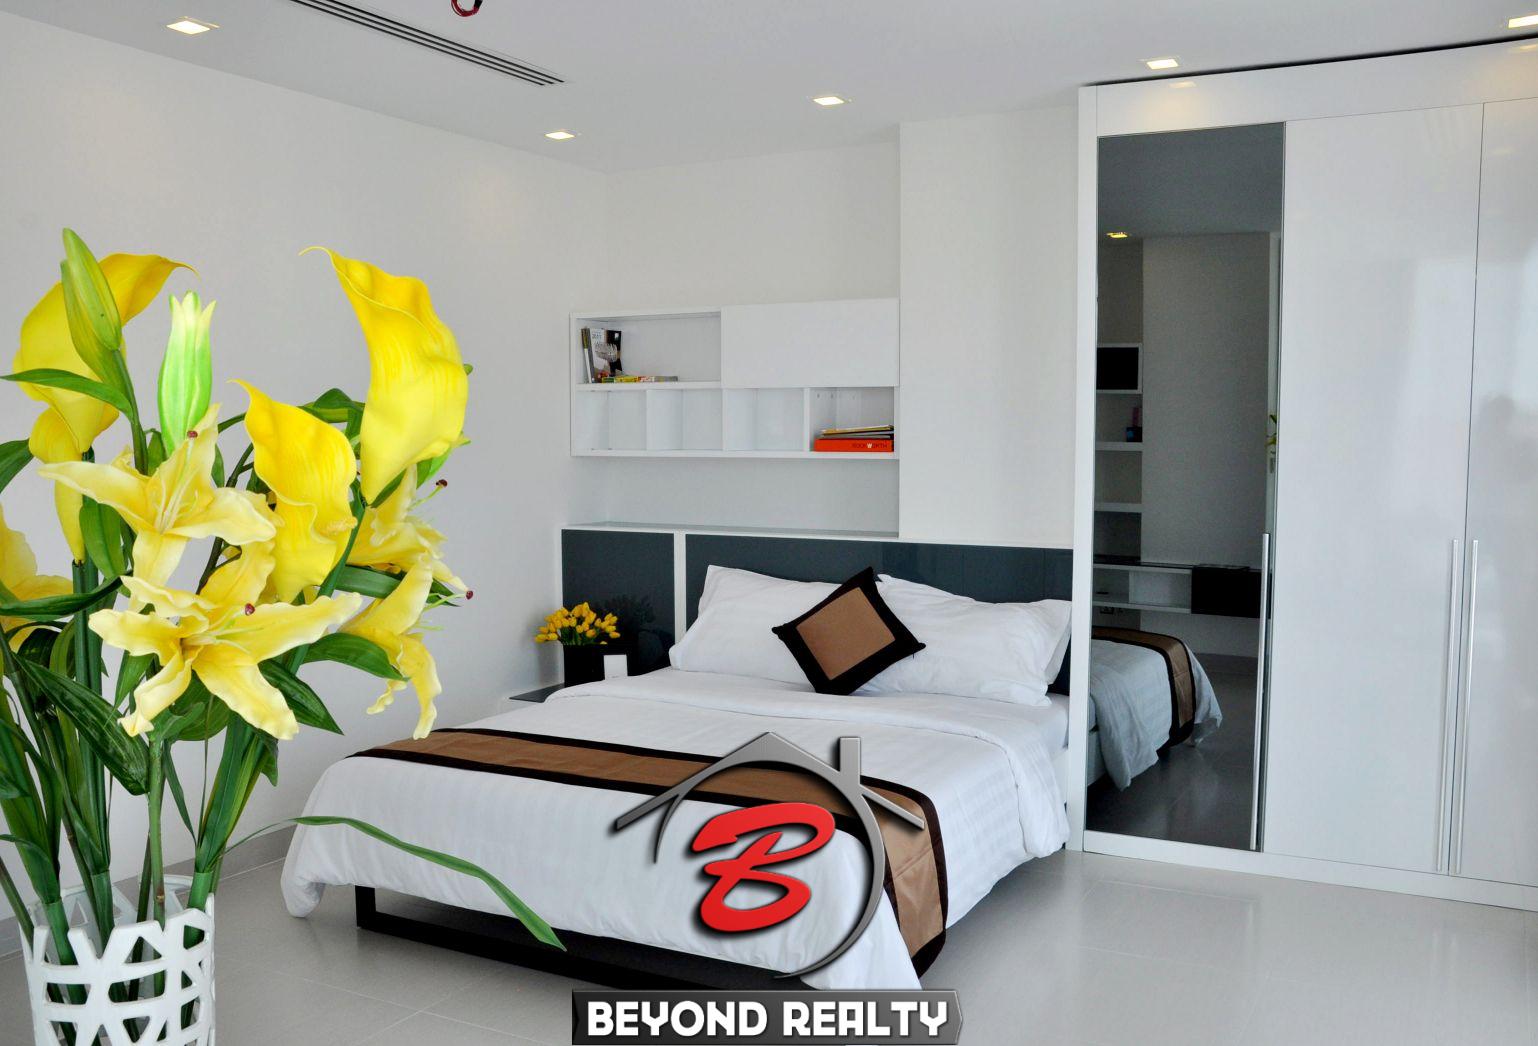 a bedroom of the 2-bedroom luxury serviced apartment for rent in BKK1 in Phnom Penh Cambodia